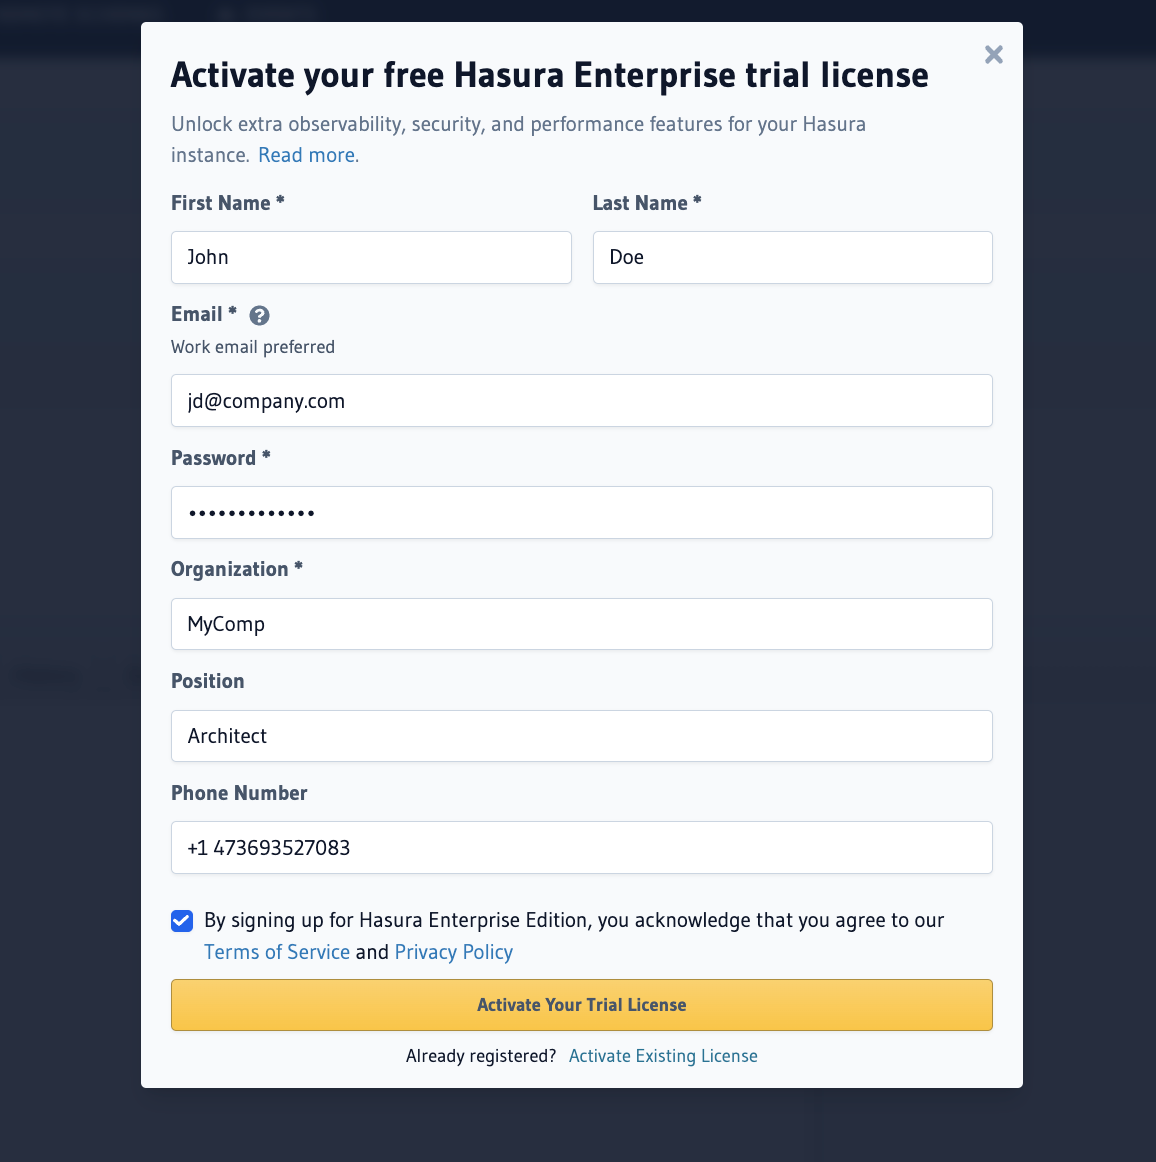 Activate your Trial License